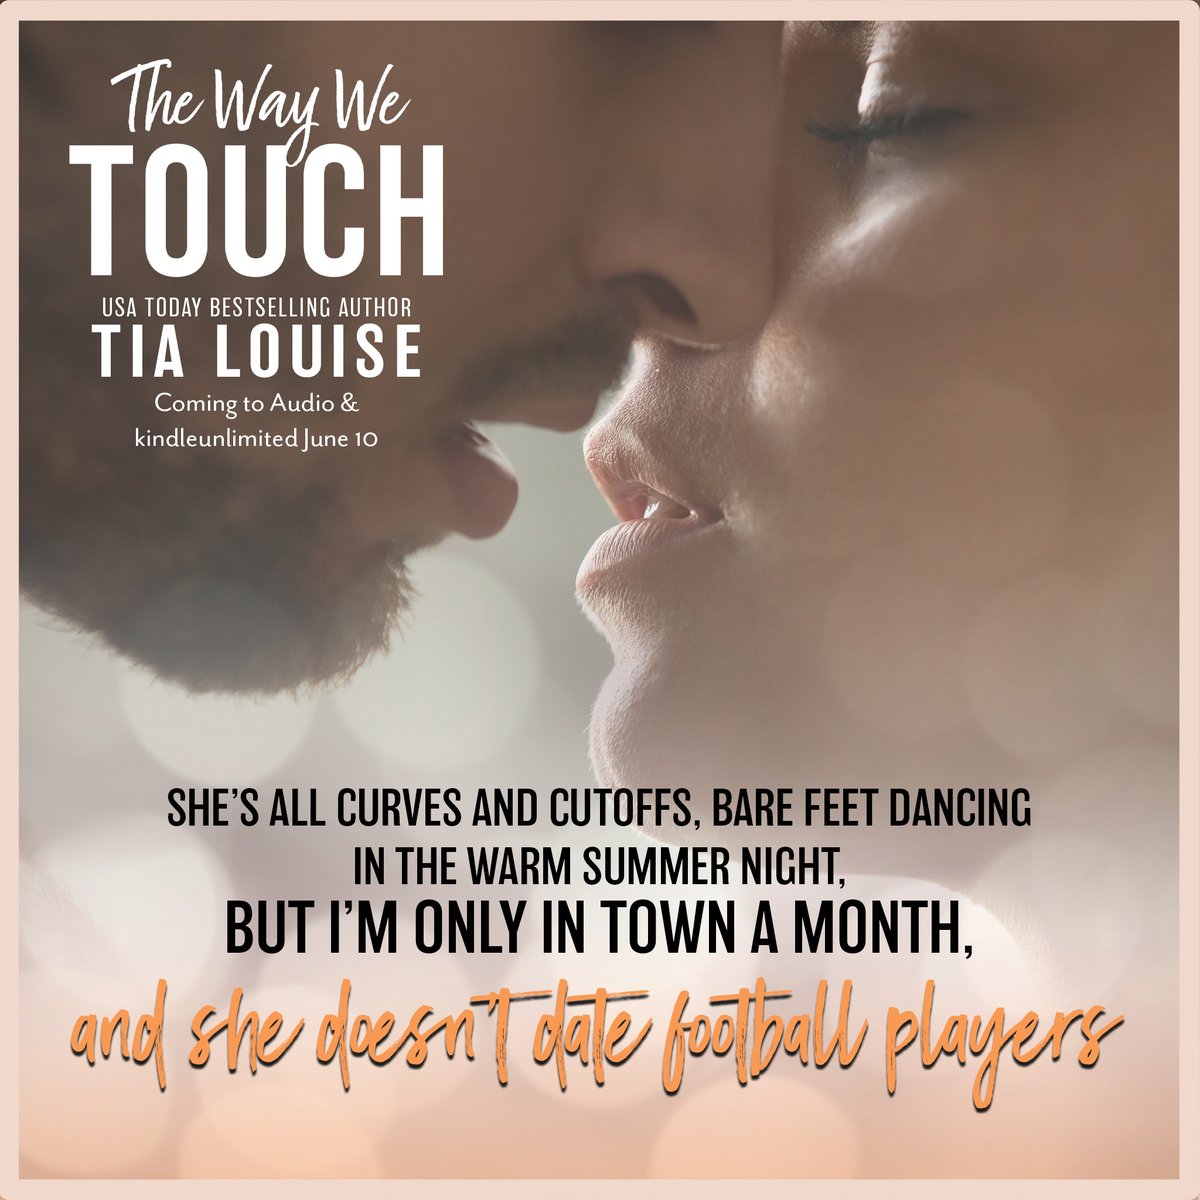 ✨TEASER: THE WAY WE TOUCH by @AuthorTLouise is coming June 10!

#PreOrder geni.us/TWWTamz

#bookteaser #comingsoon #smalltownromance #sportsromance #tialouise #closeproximity #book  #romancebooks #spicyromance #theauthoragency #brothersbestfriend @theauthoragency